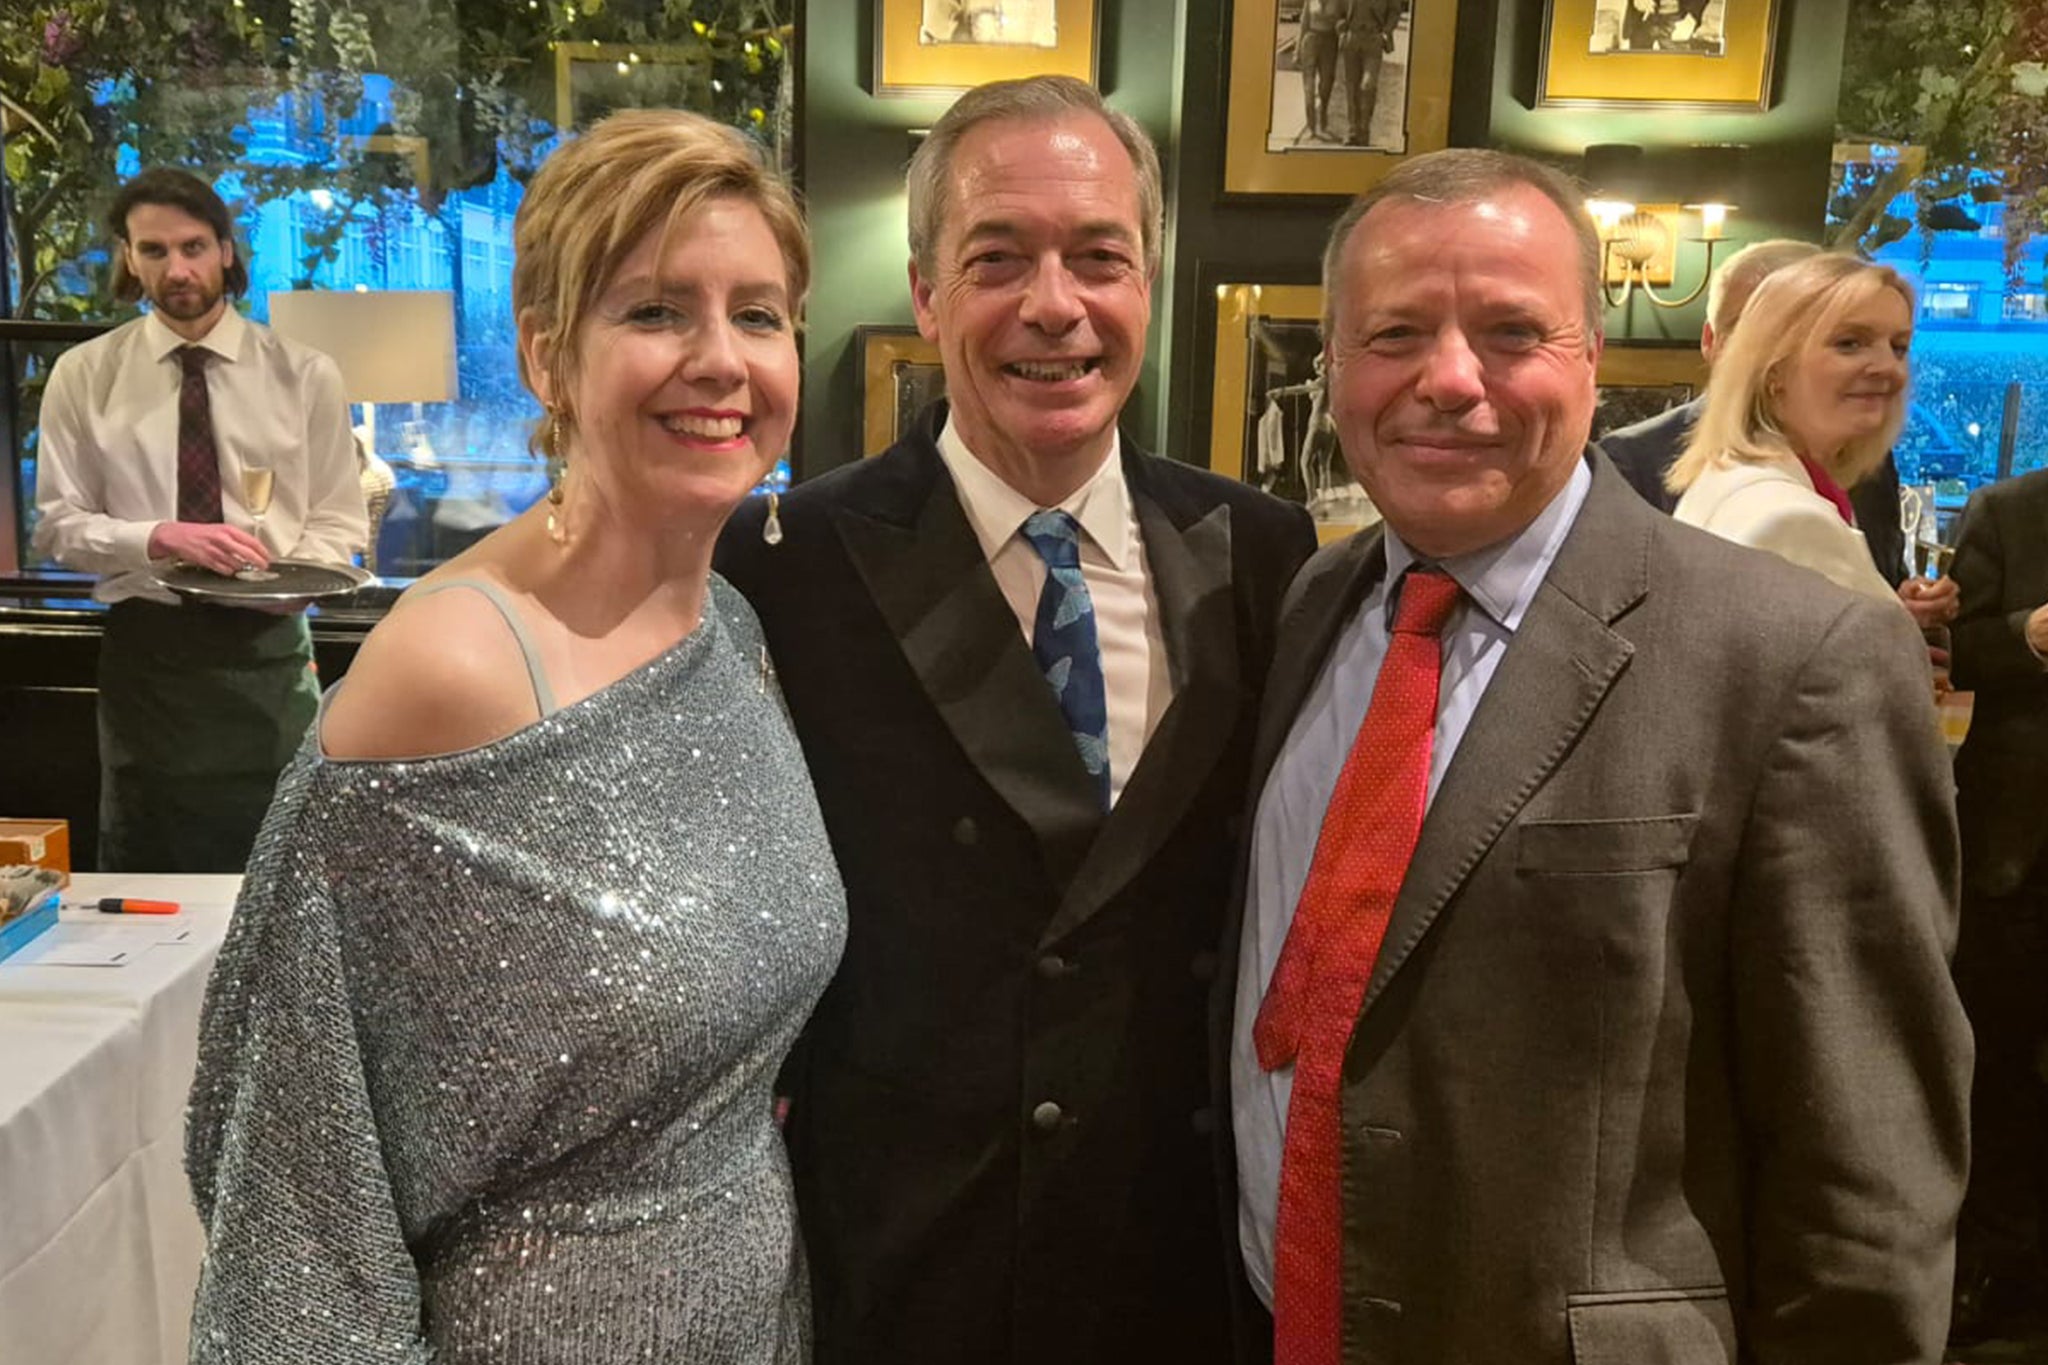 Nigel Farage at his birthday party with Aaron Banks and finger-flipping ex-minister Andrea Jenkyns